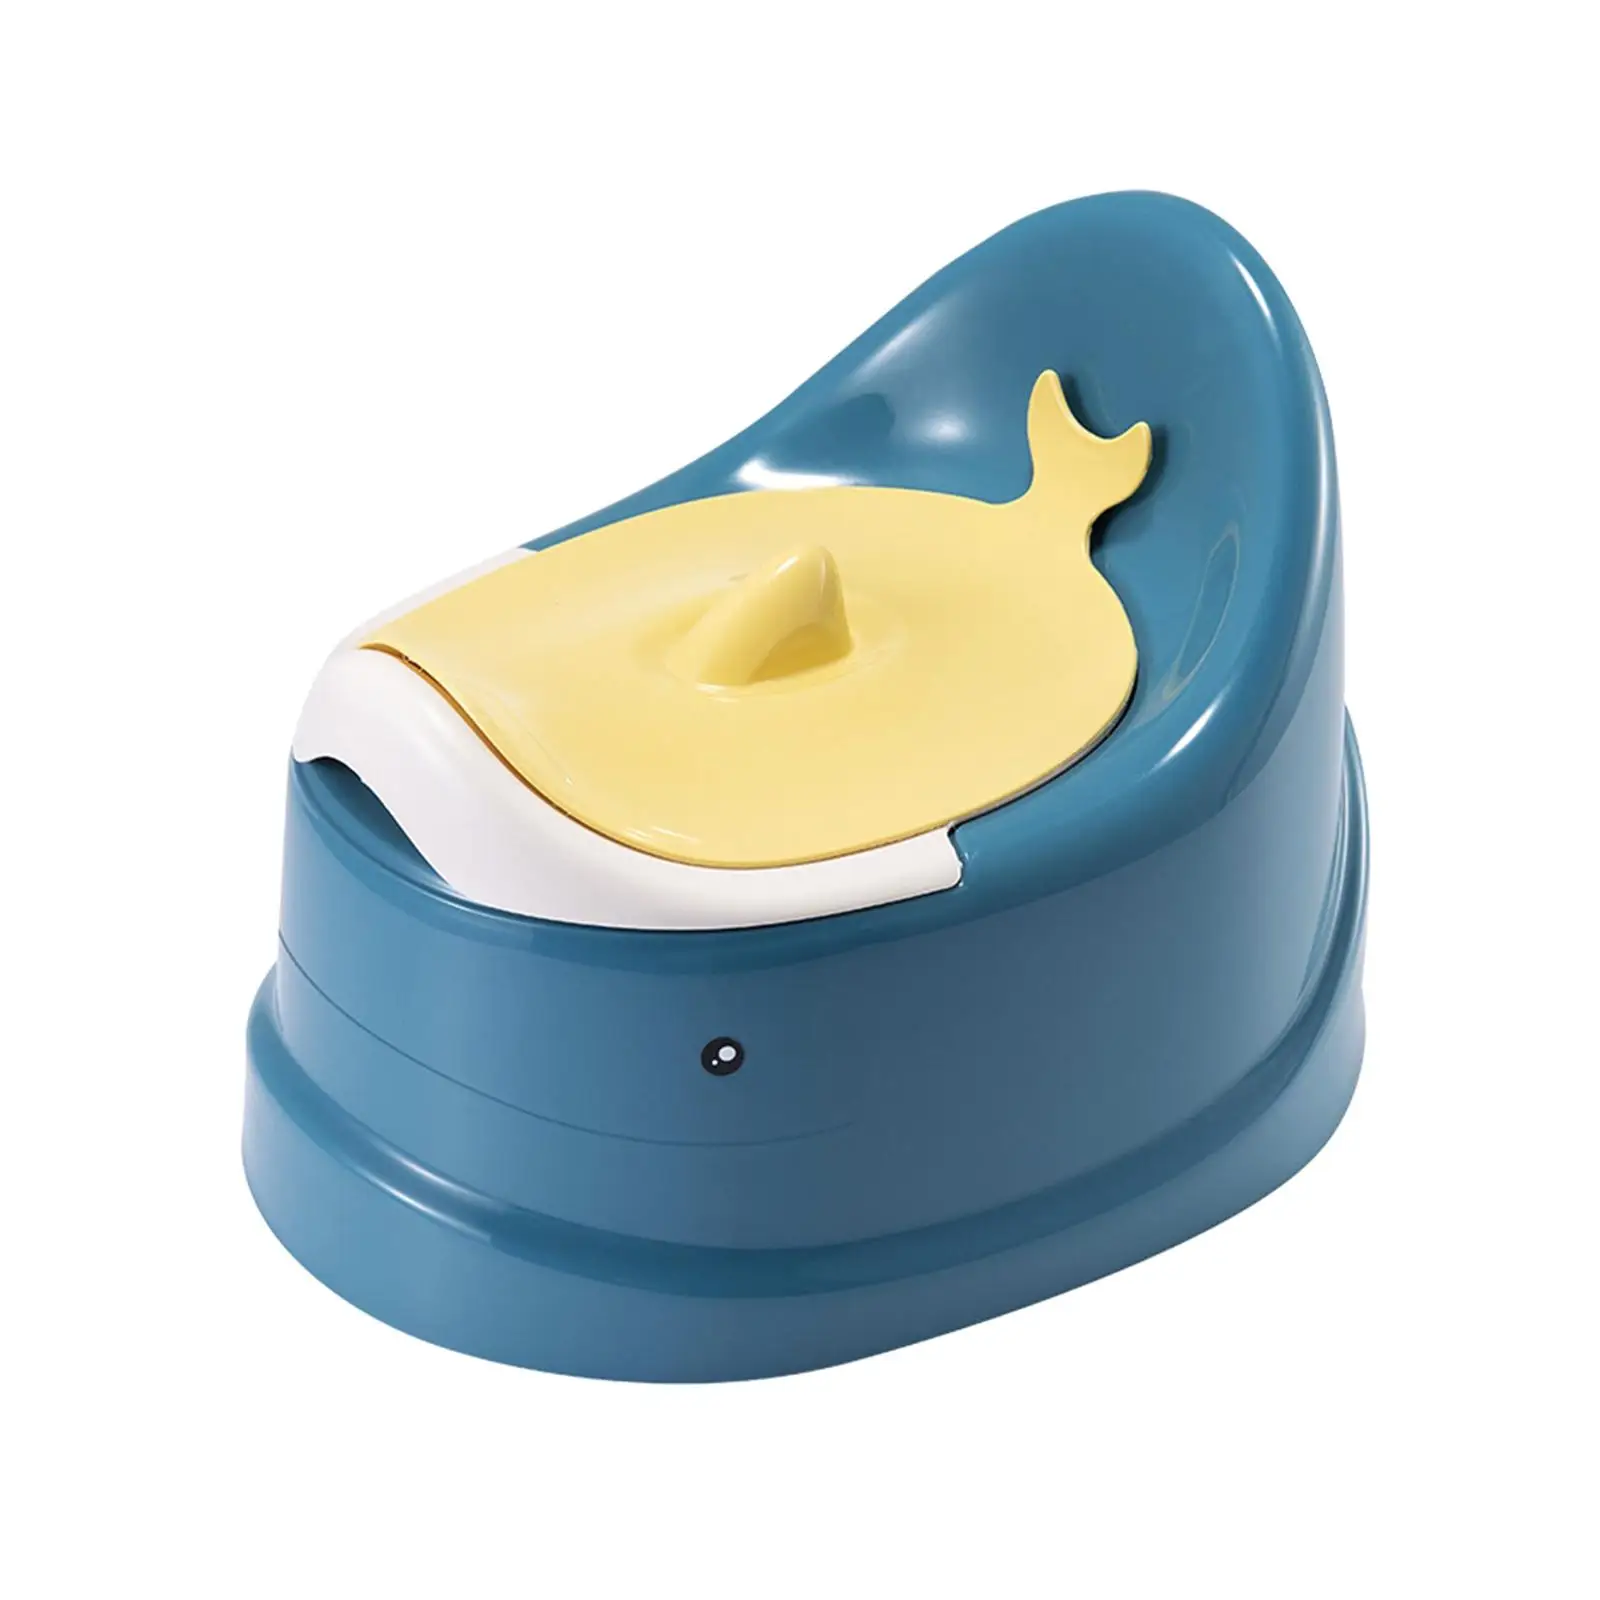 Potty Training Toilet for Girls Boys AntiSlip with Handle Easy to Clean Comfortable Potty Trainer Baby Potty Child Potty Chair